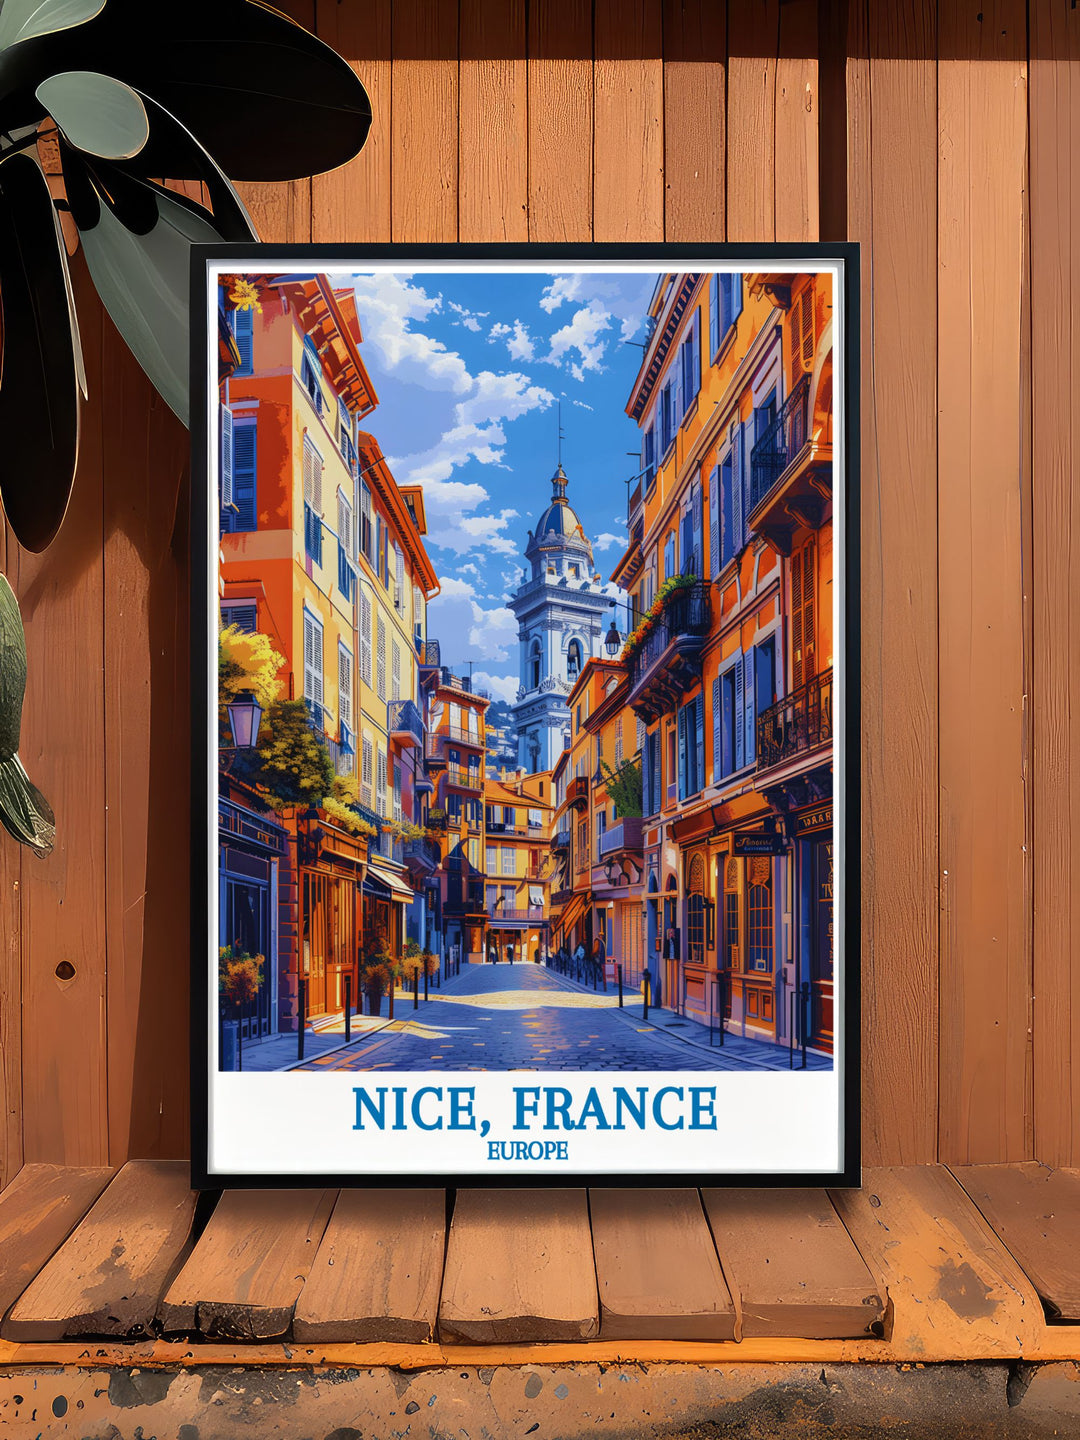 This art print beautifully depicts the lively streets of Vieux Nice, France, with its warm colored buildings and vibrant market scenes, ideal for those who love historic and scenic art.